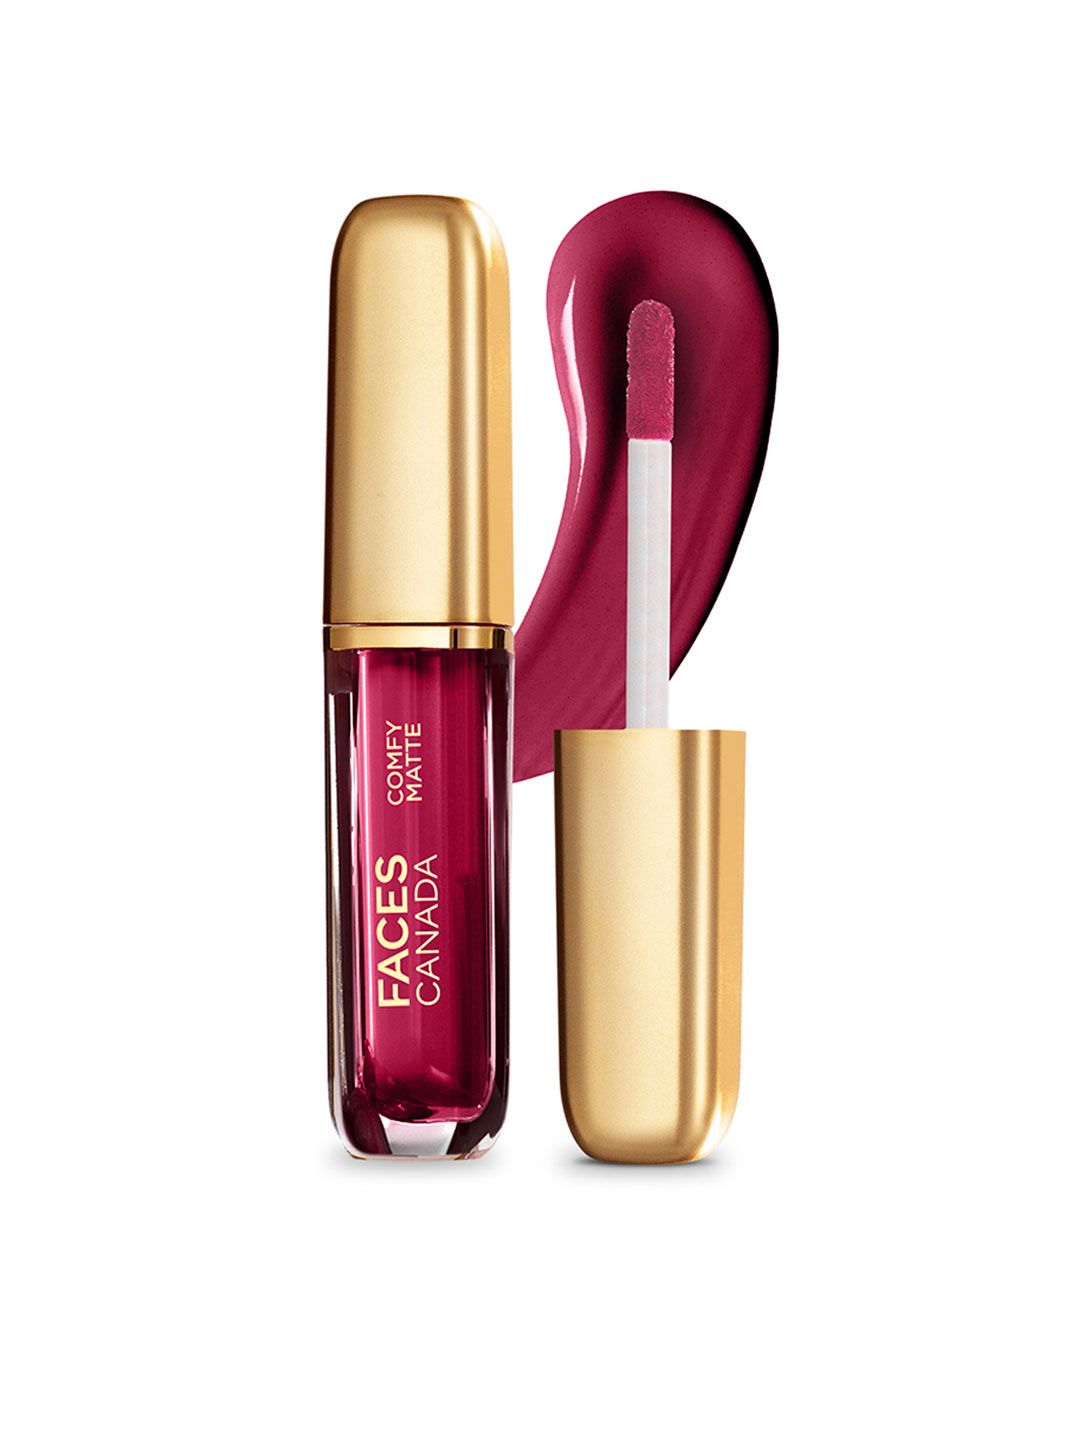 FACES CANADA Comfy Matte Lip Color 3 ml - Any Day Now 04 Price in India